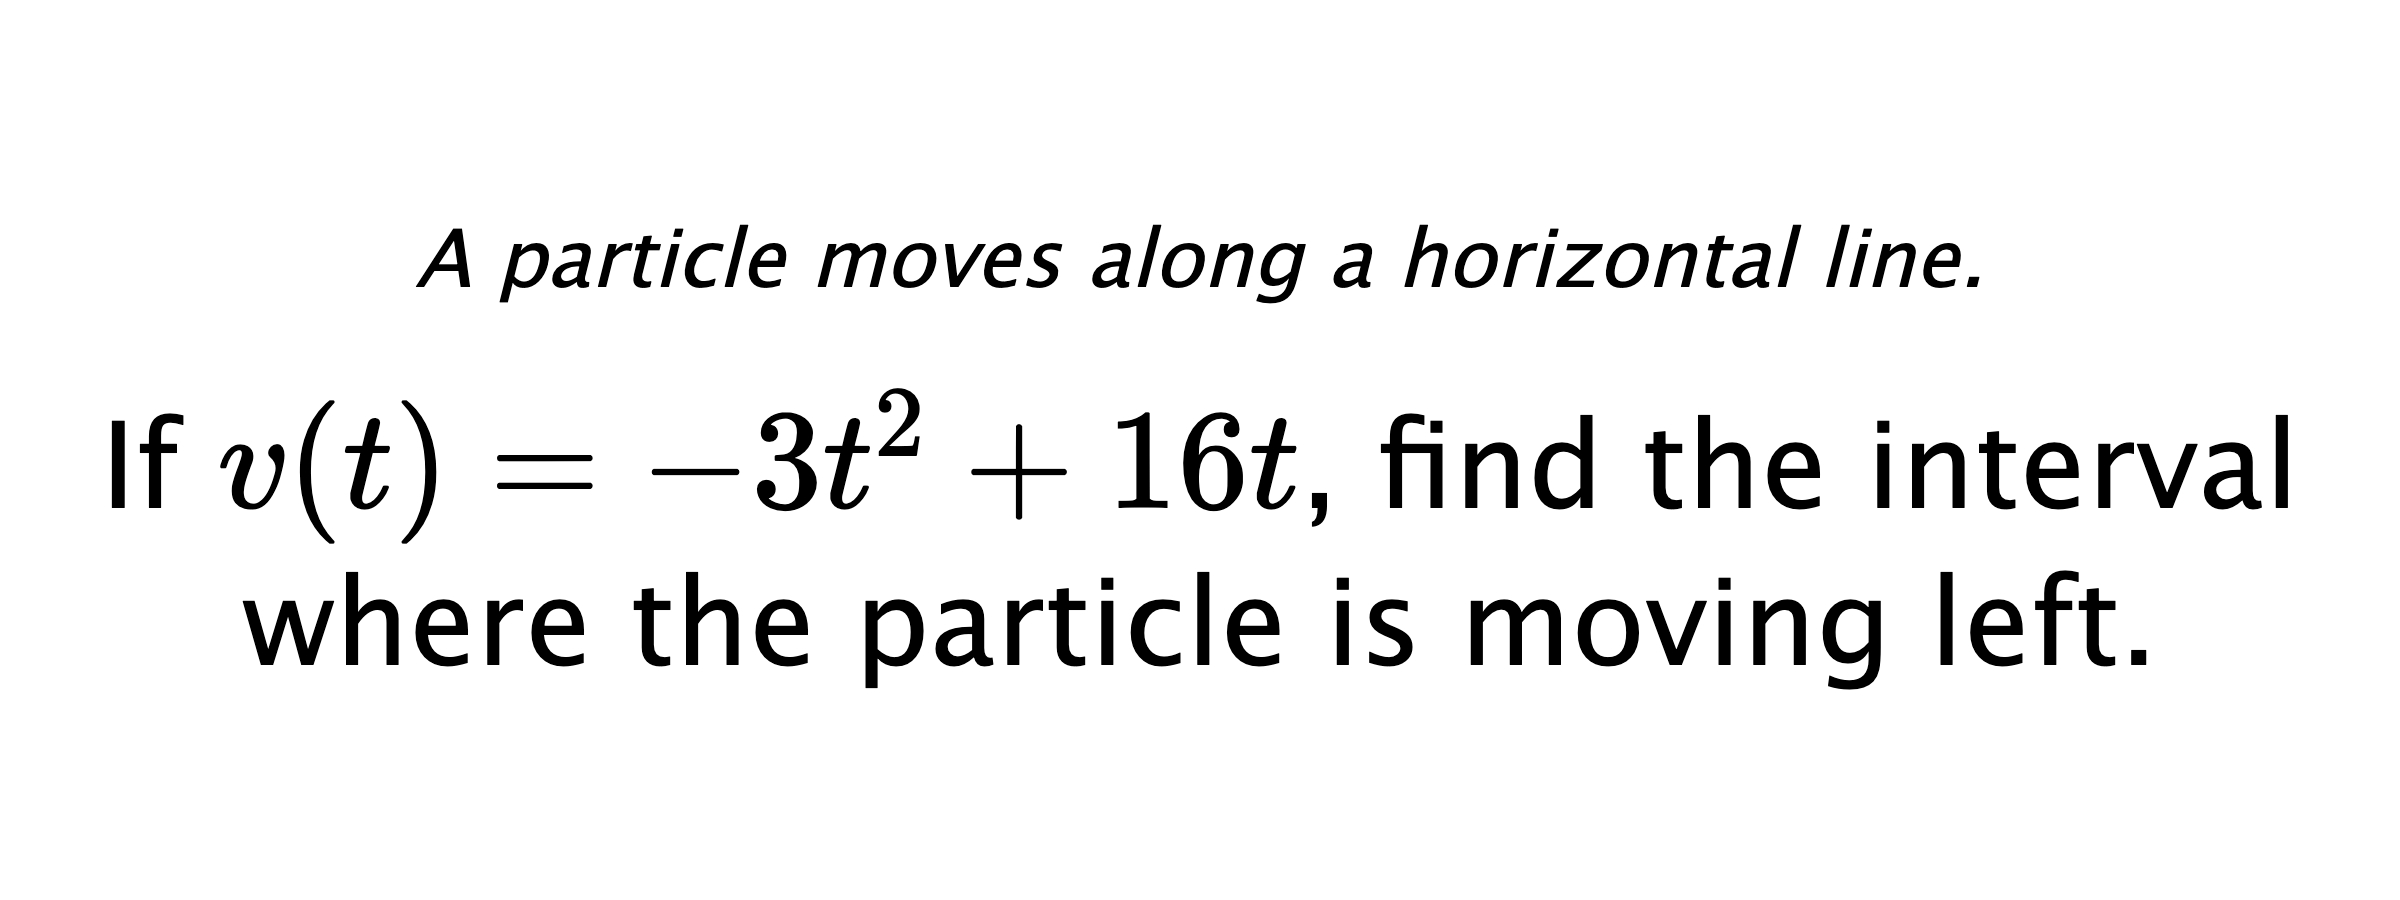 A particle moves along a horizontal line. If $ v(t)=-3t^2+16t $, find the interval where the particle is moving left.